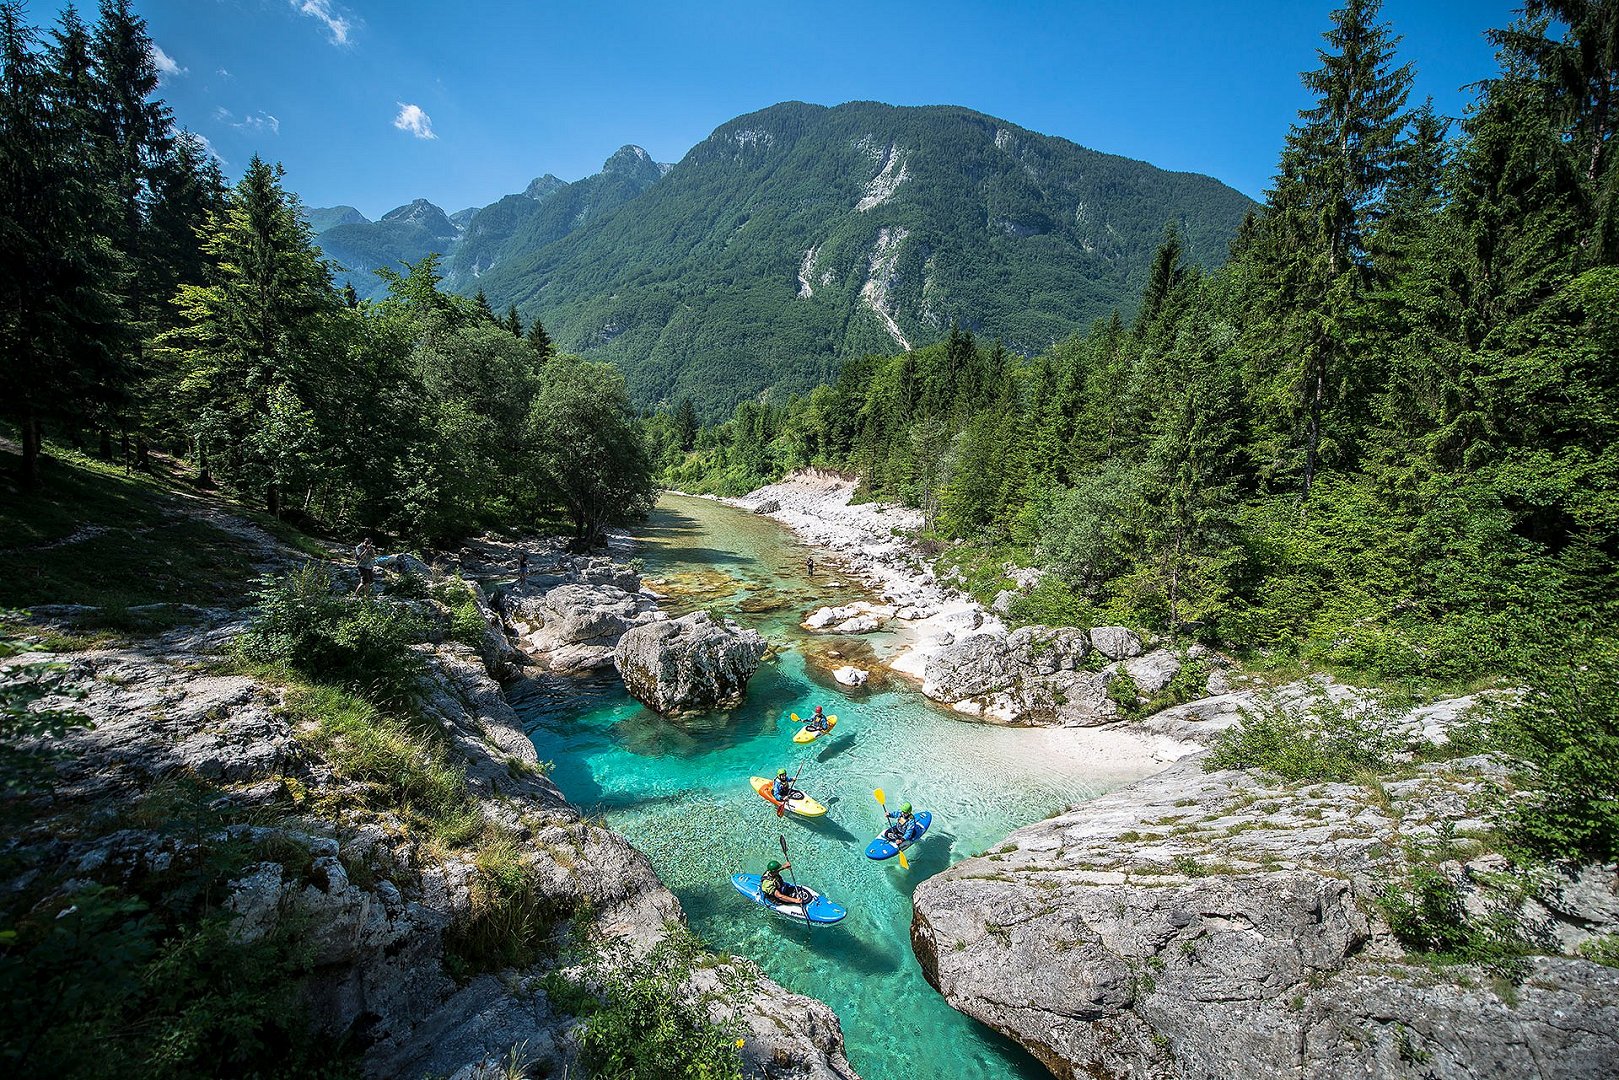 A group of kayakers on the emerald river Soča in the Triglav National Park